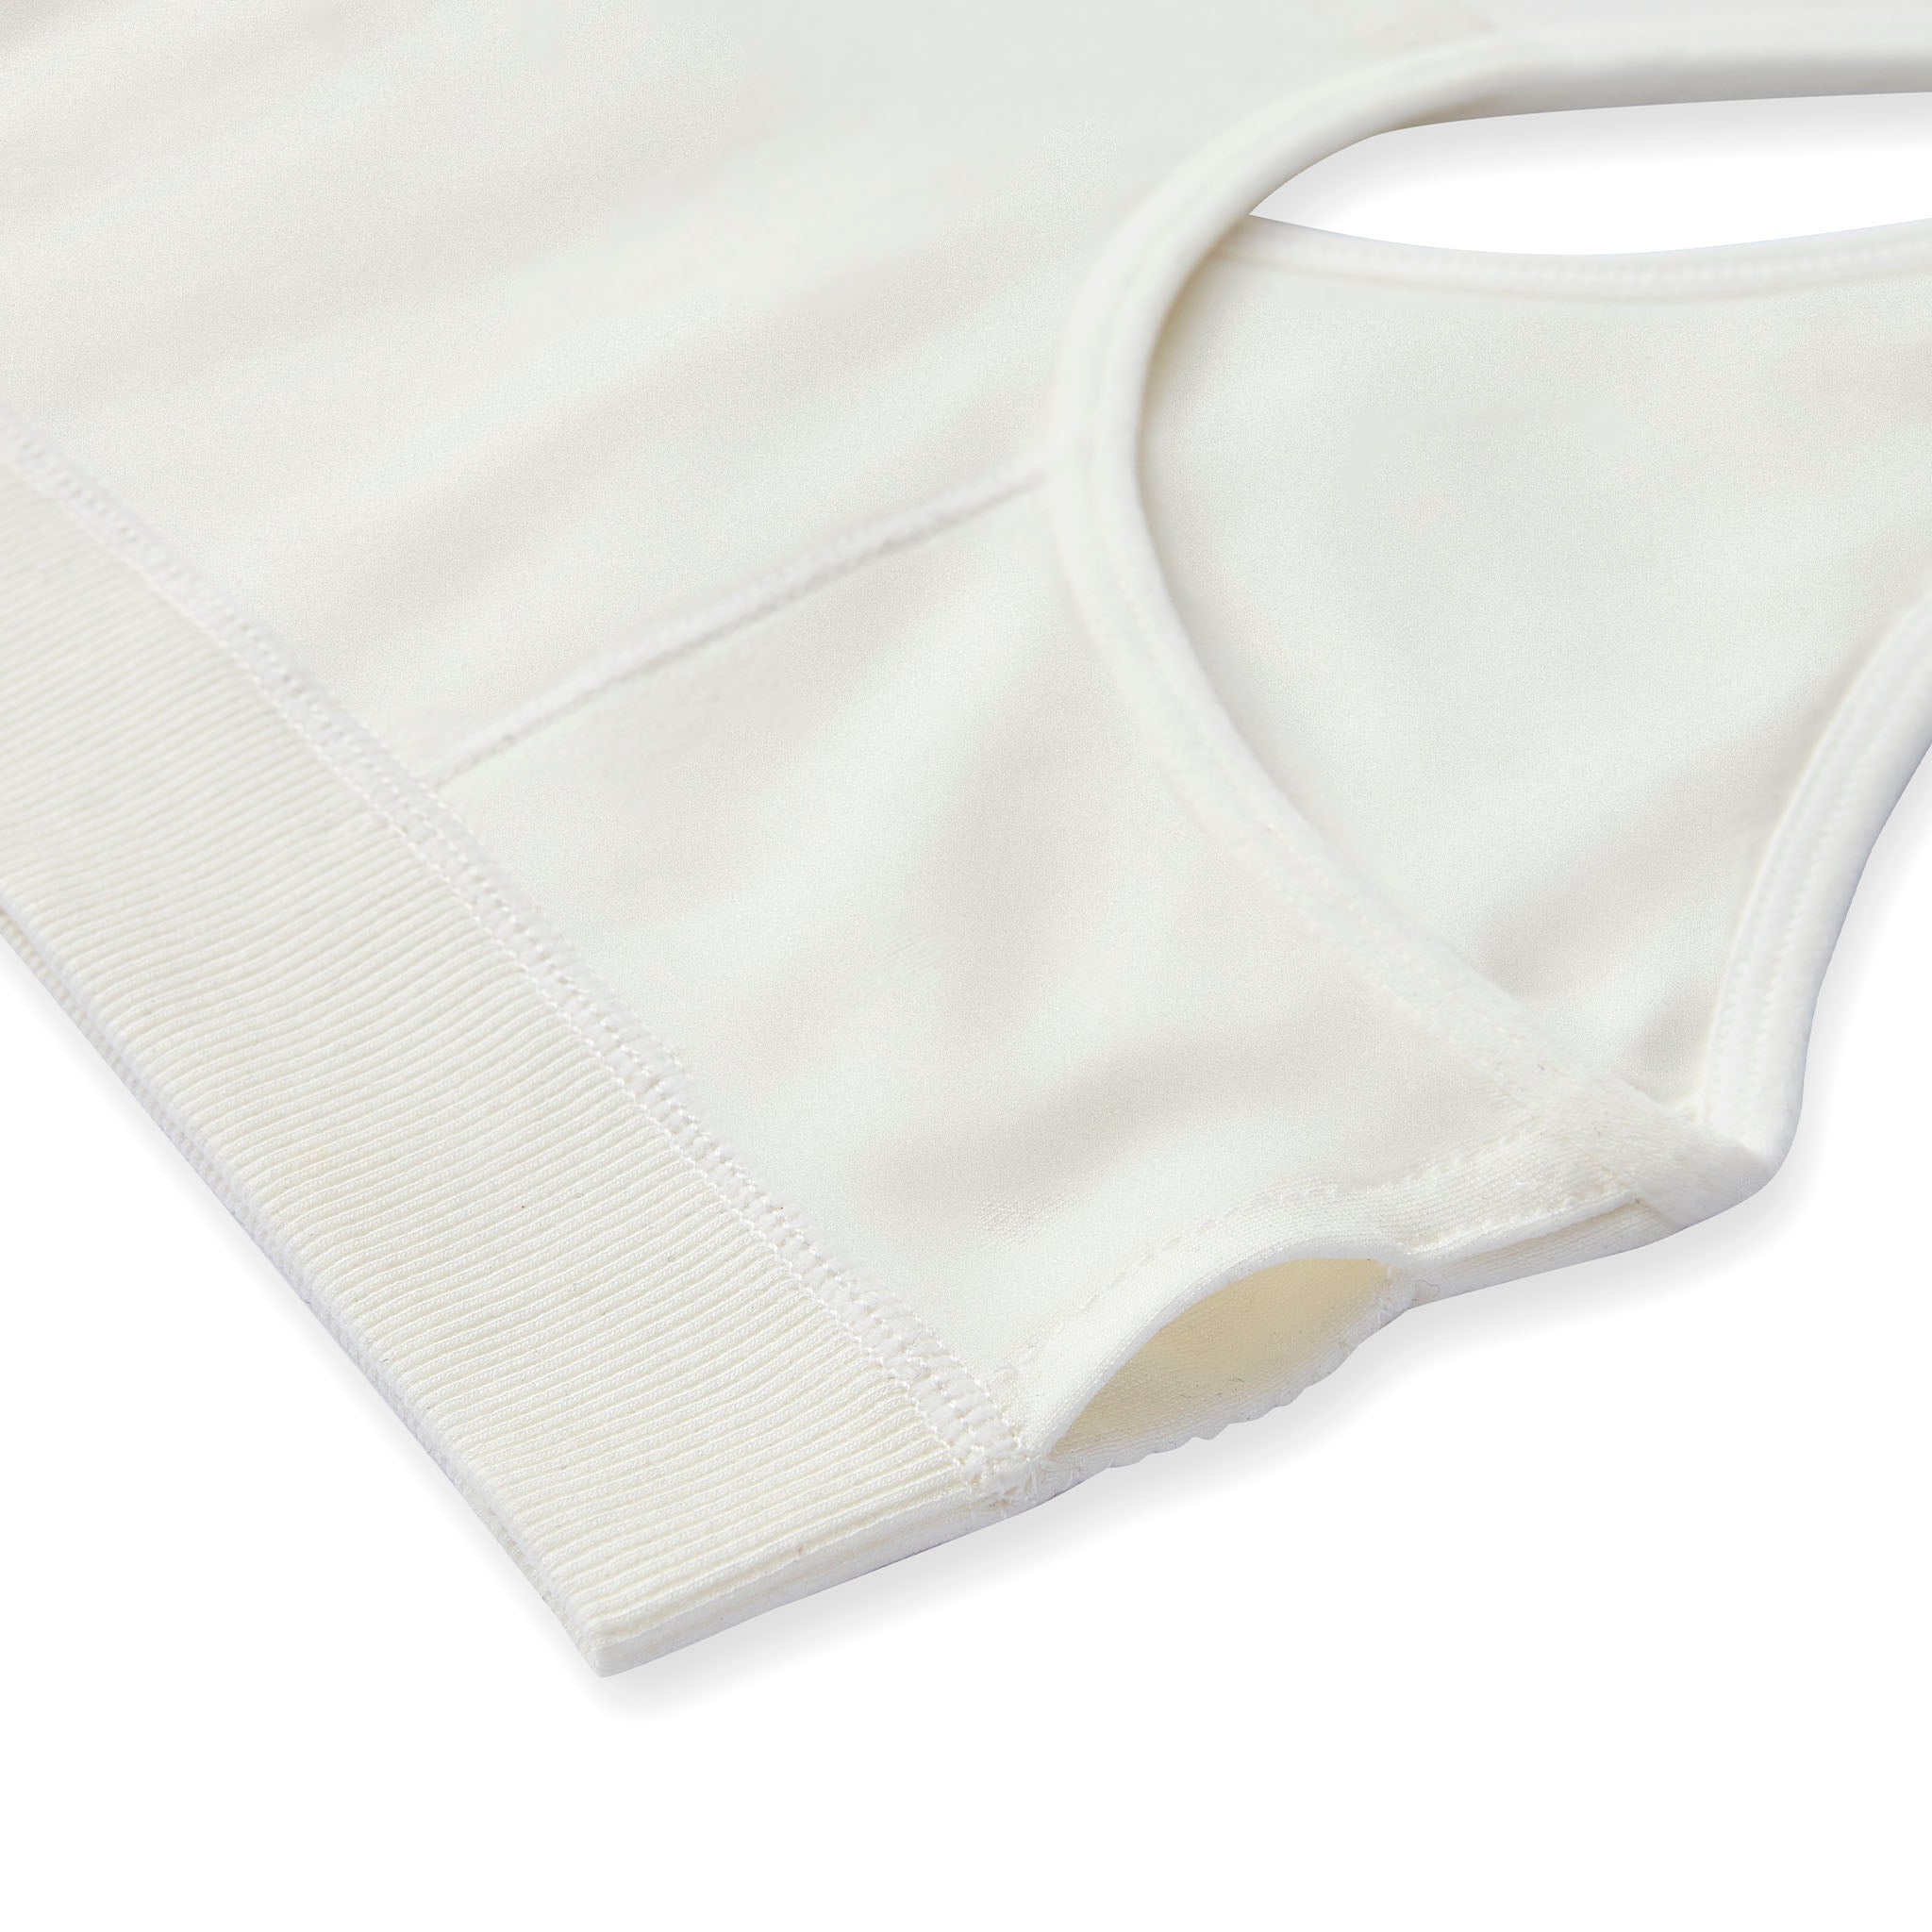 Triswi's White Pure Cotton Bra for Hot and Humid Indian Weather